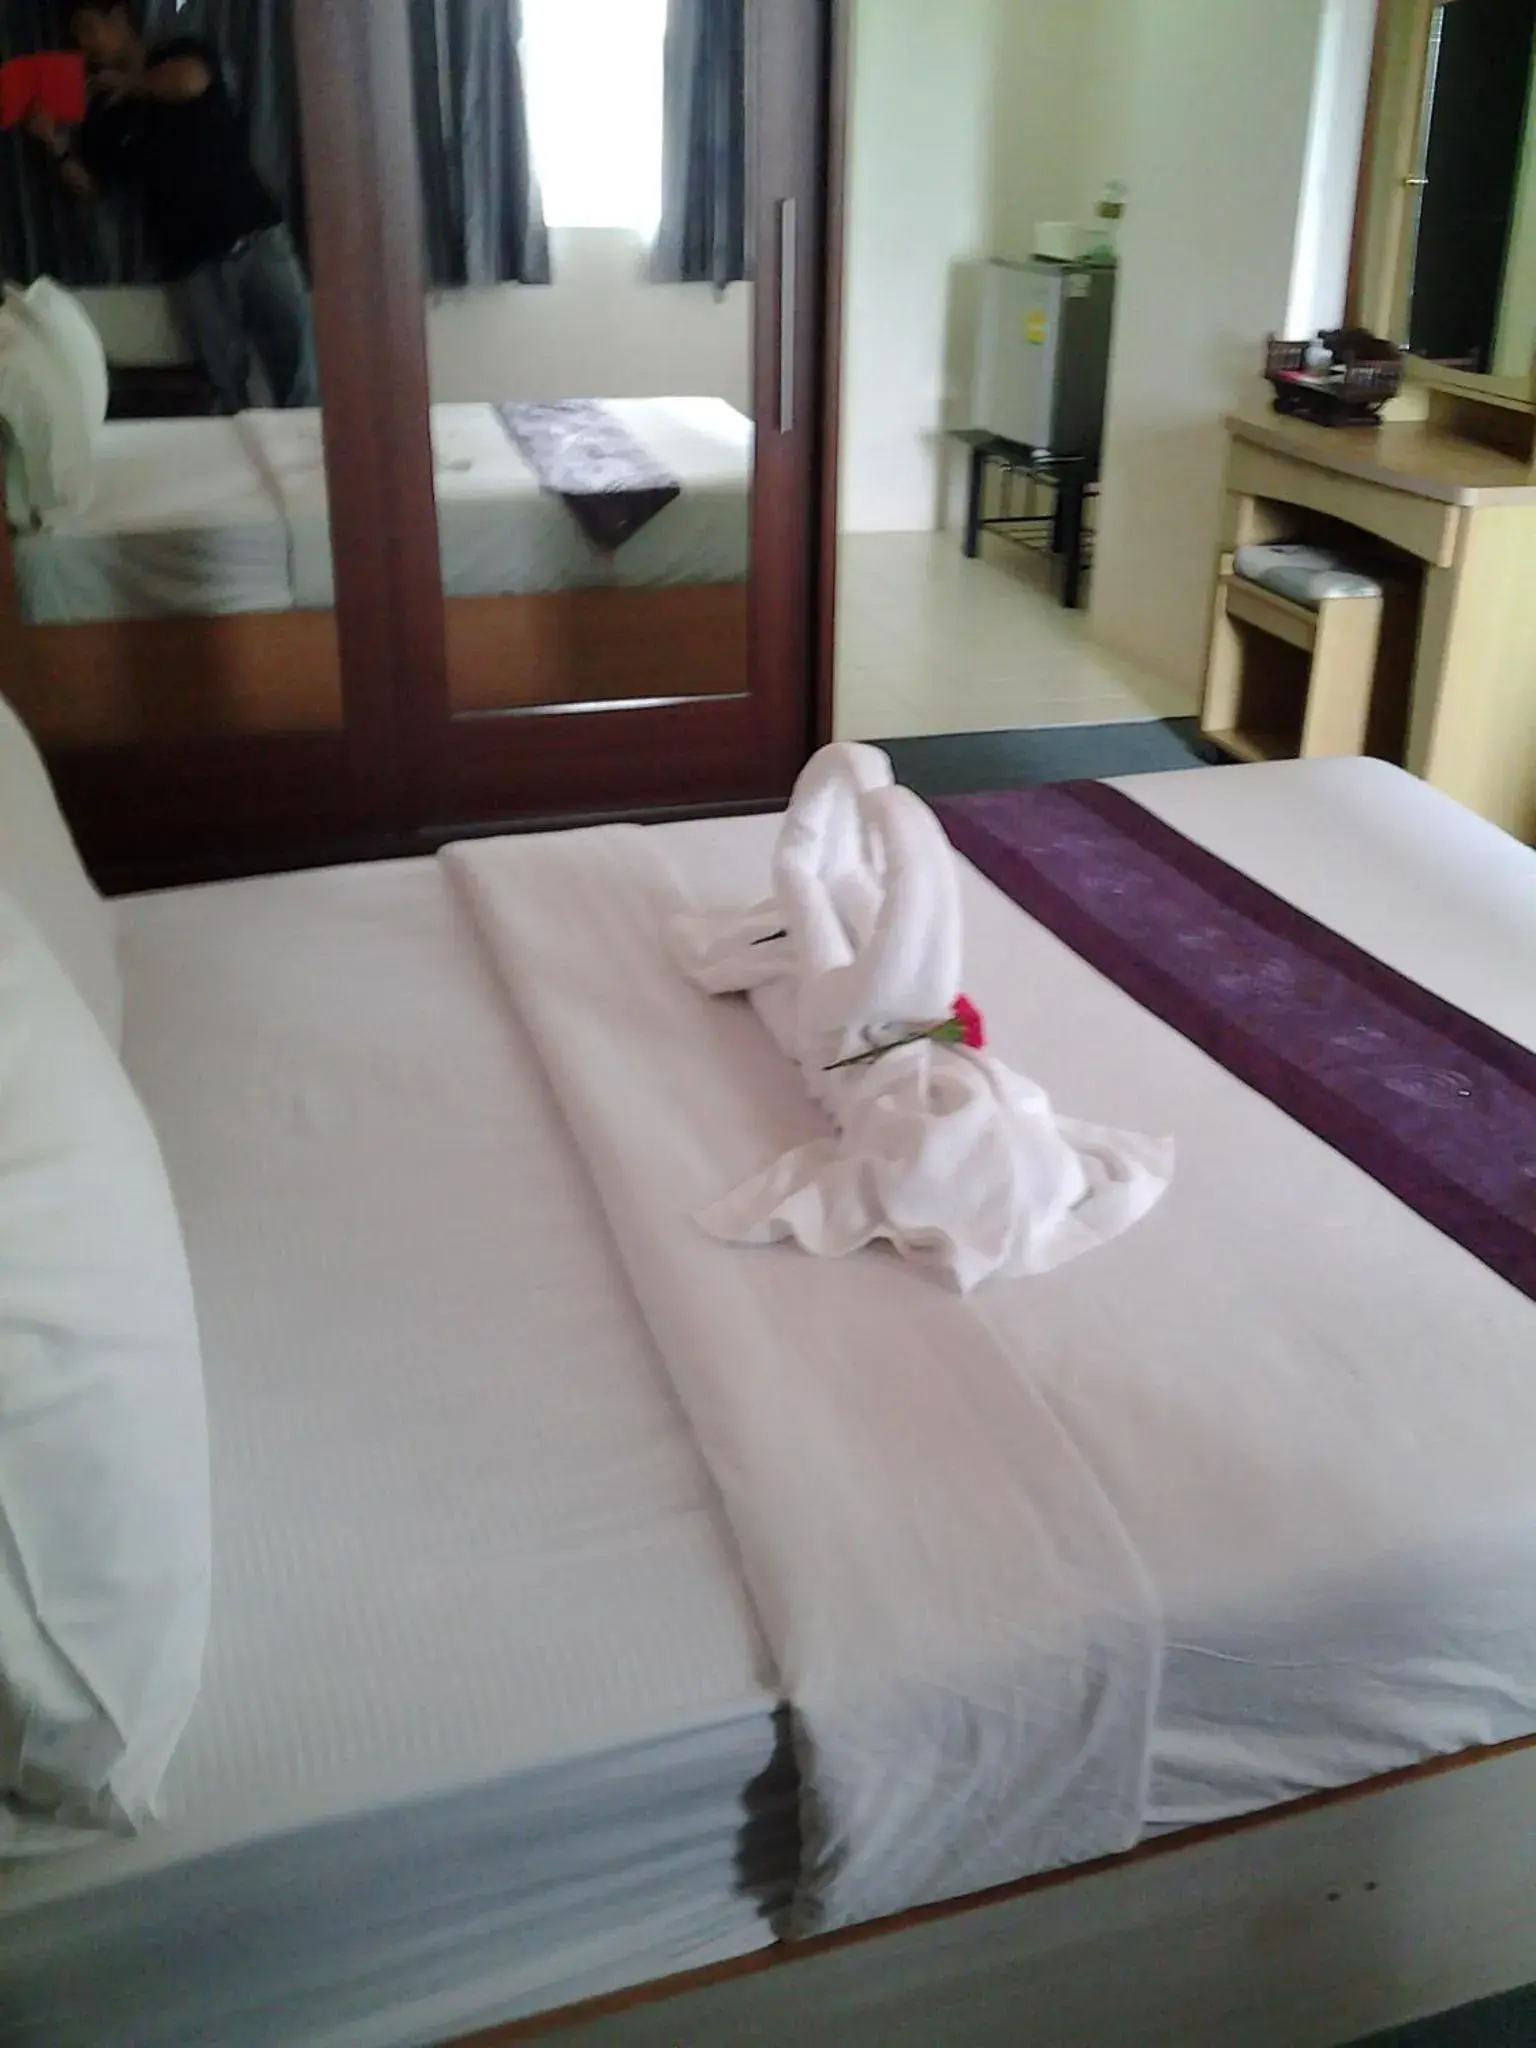 Day, Bed in King Royal II Hotel